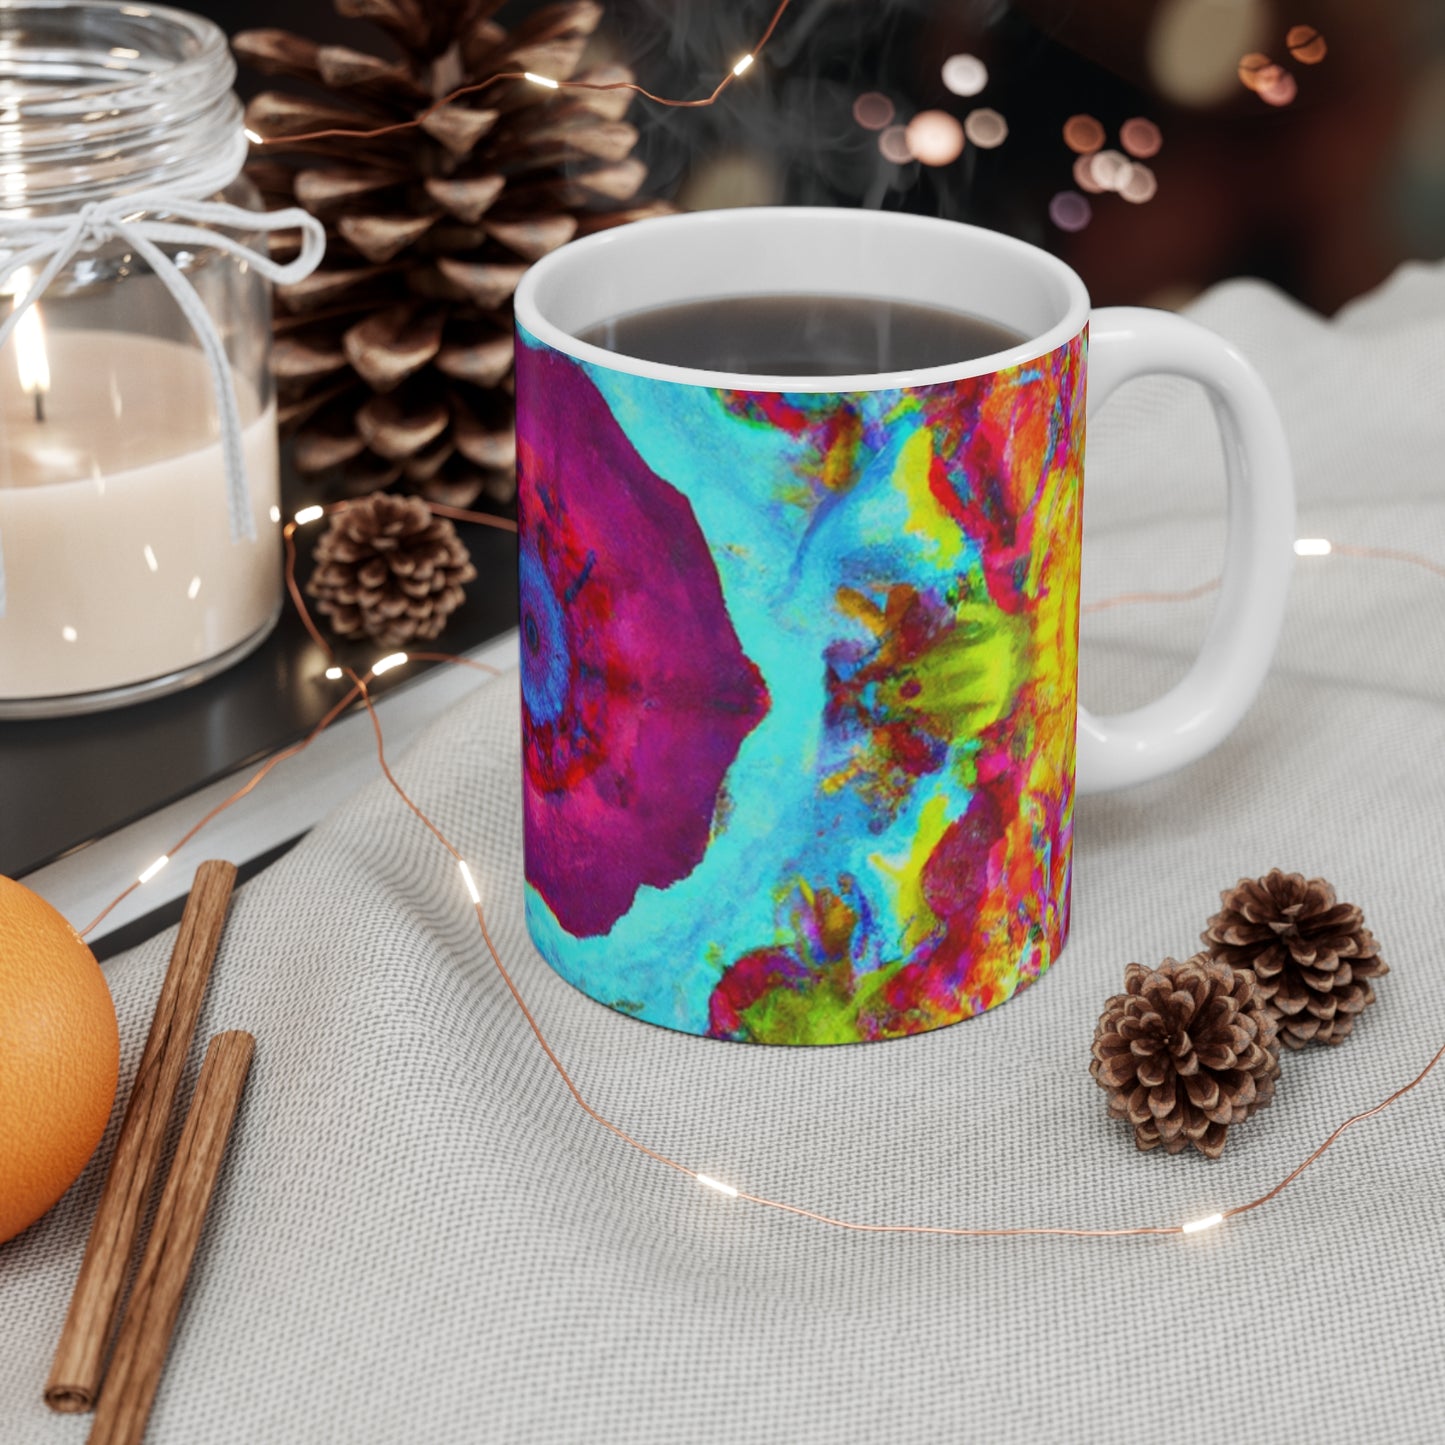 Jenny's Java - Psychedelic Coffee Cup Mug 11 Ounce